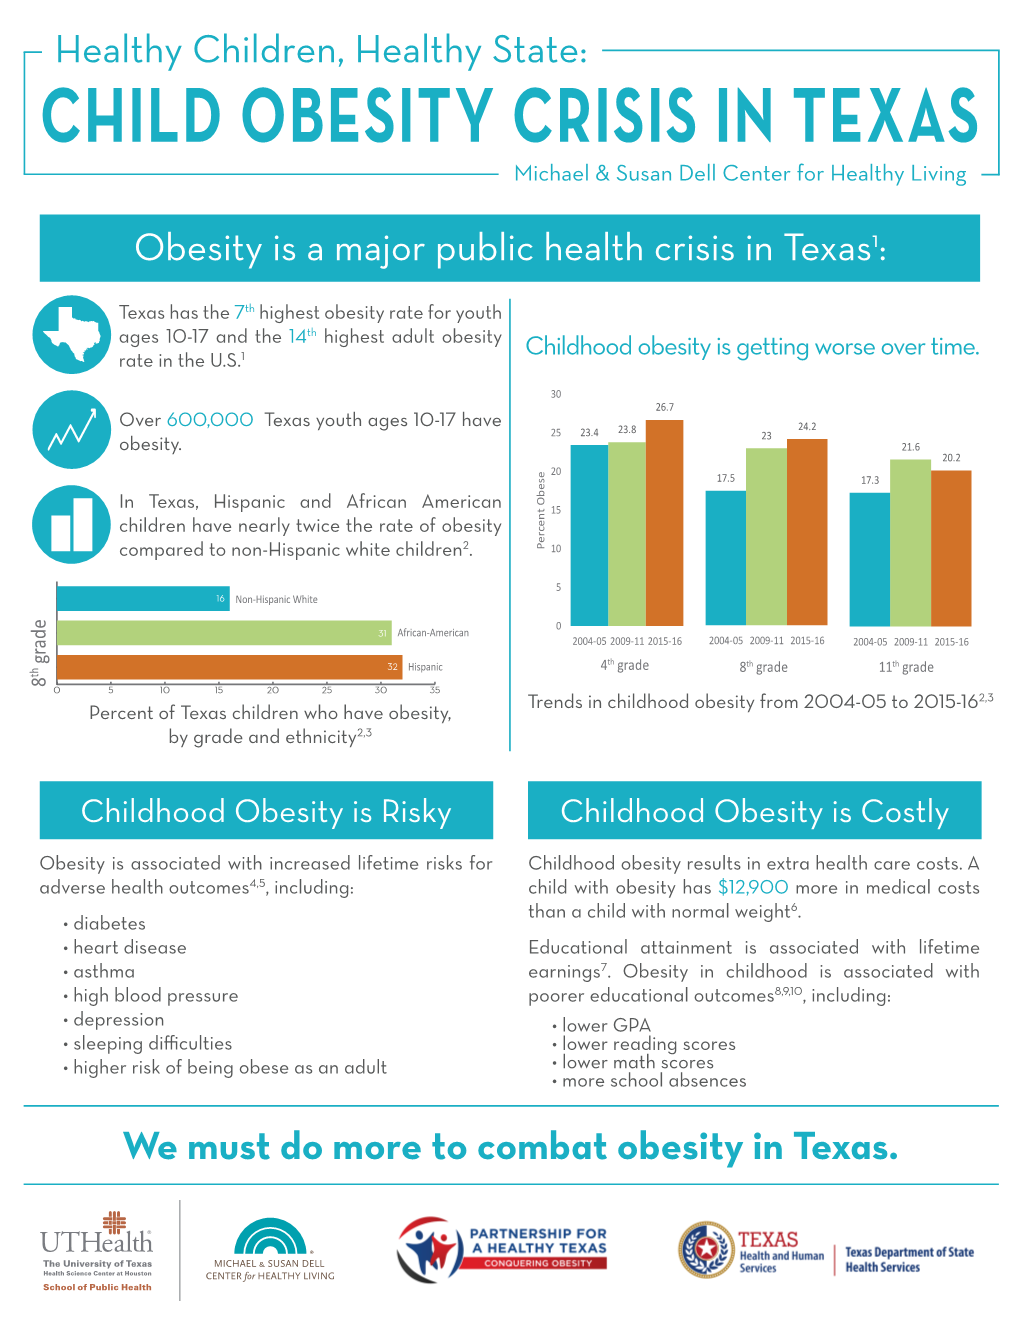 CHILD OBESITY CRISIS in TEXAS Michael & Susan Dell Center for Healthy Living